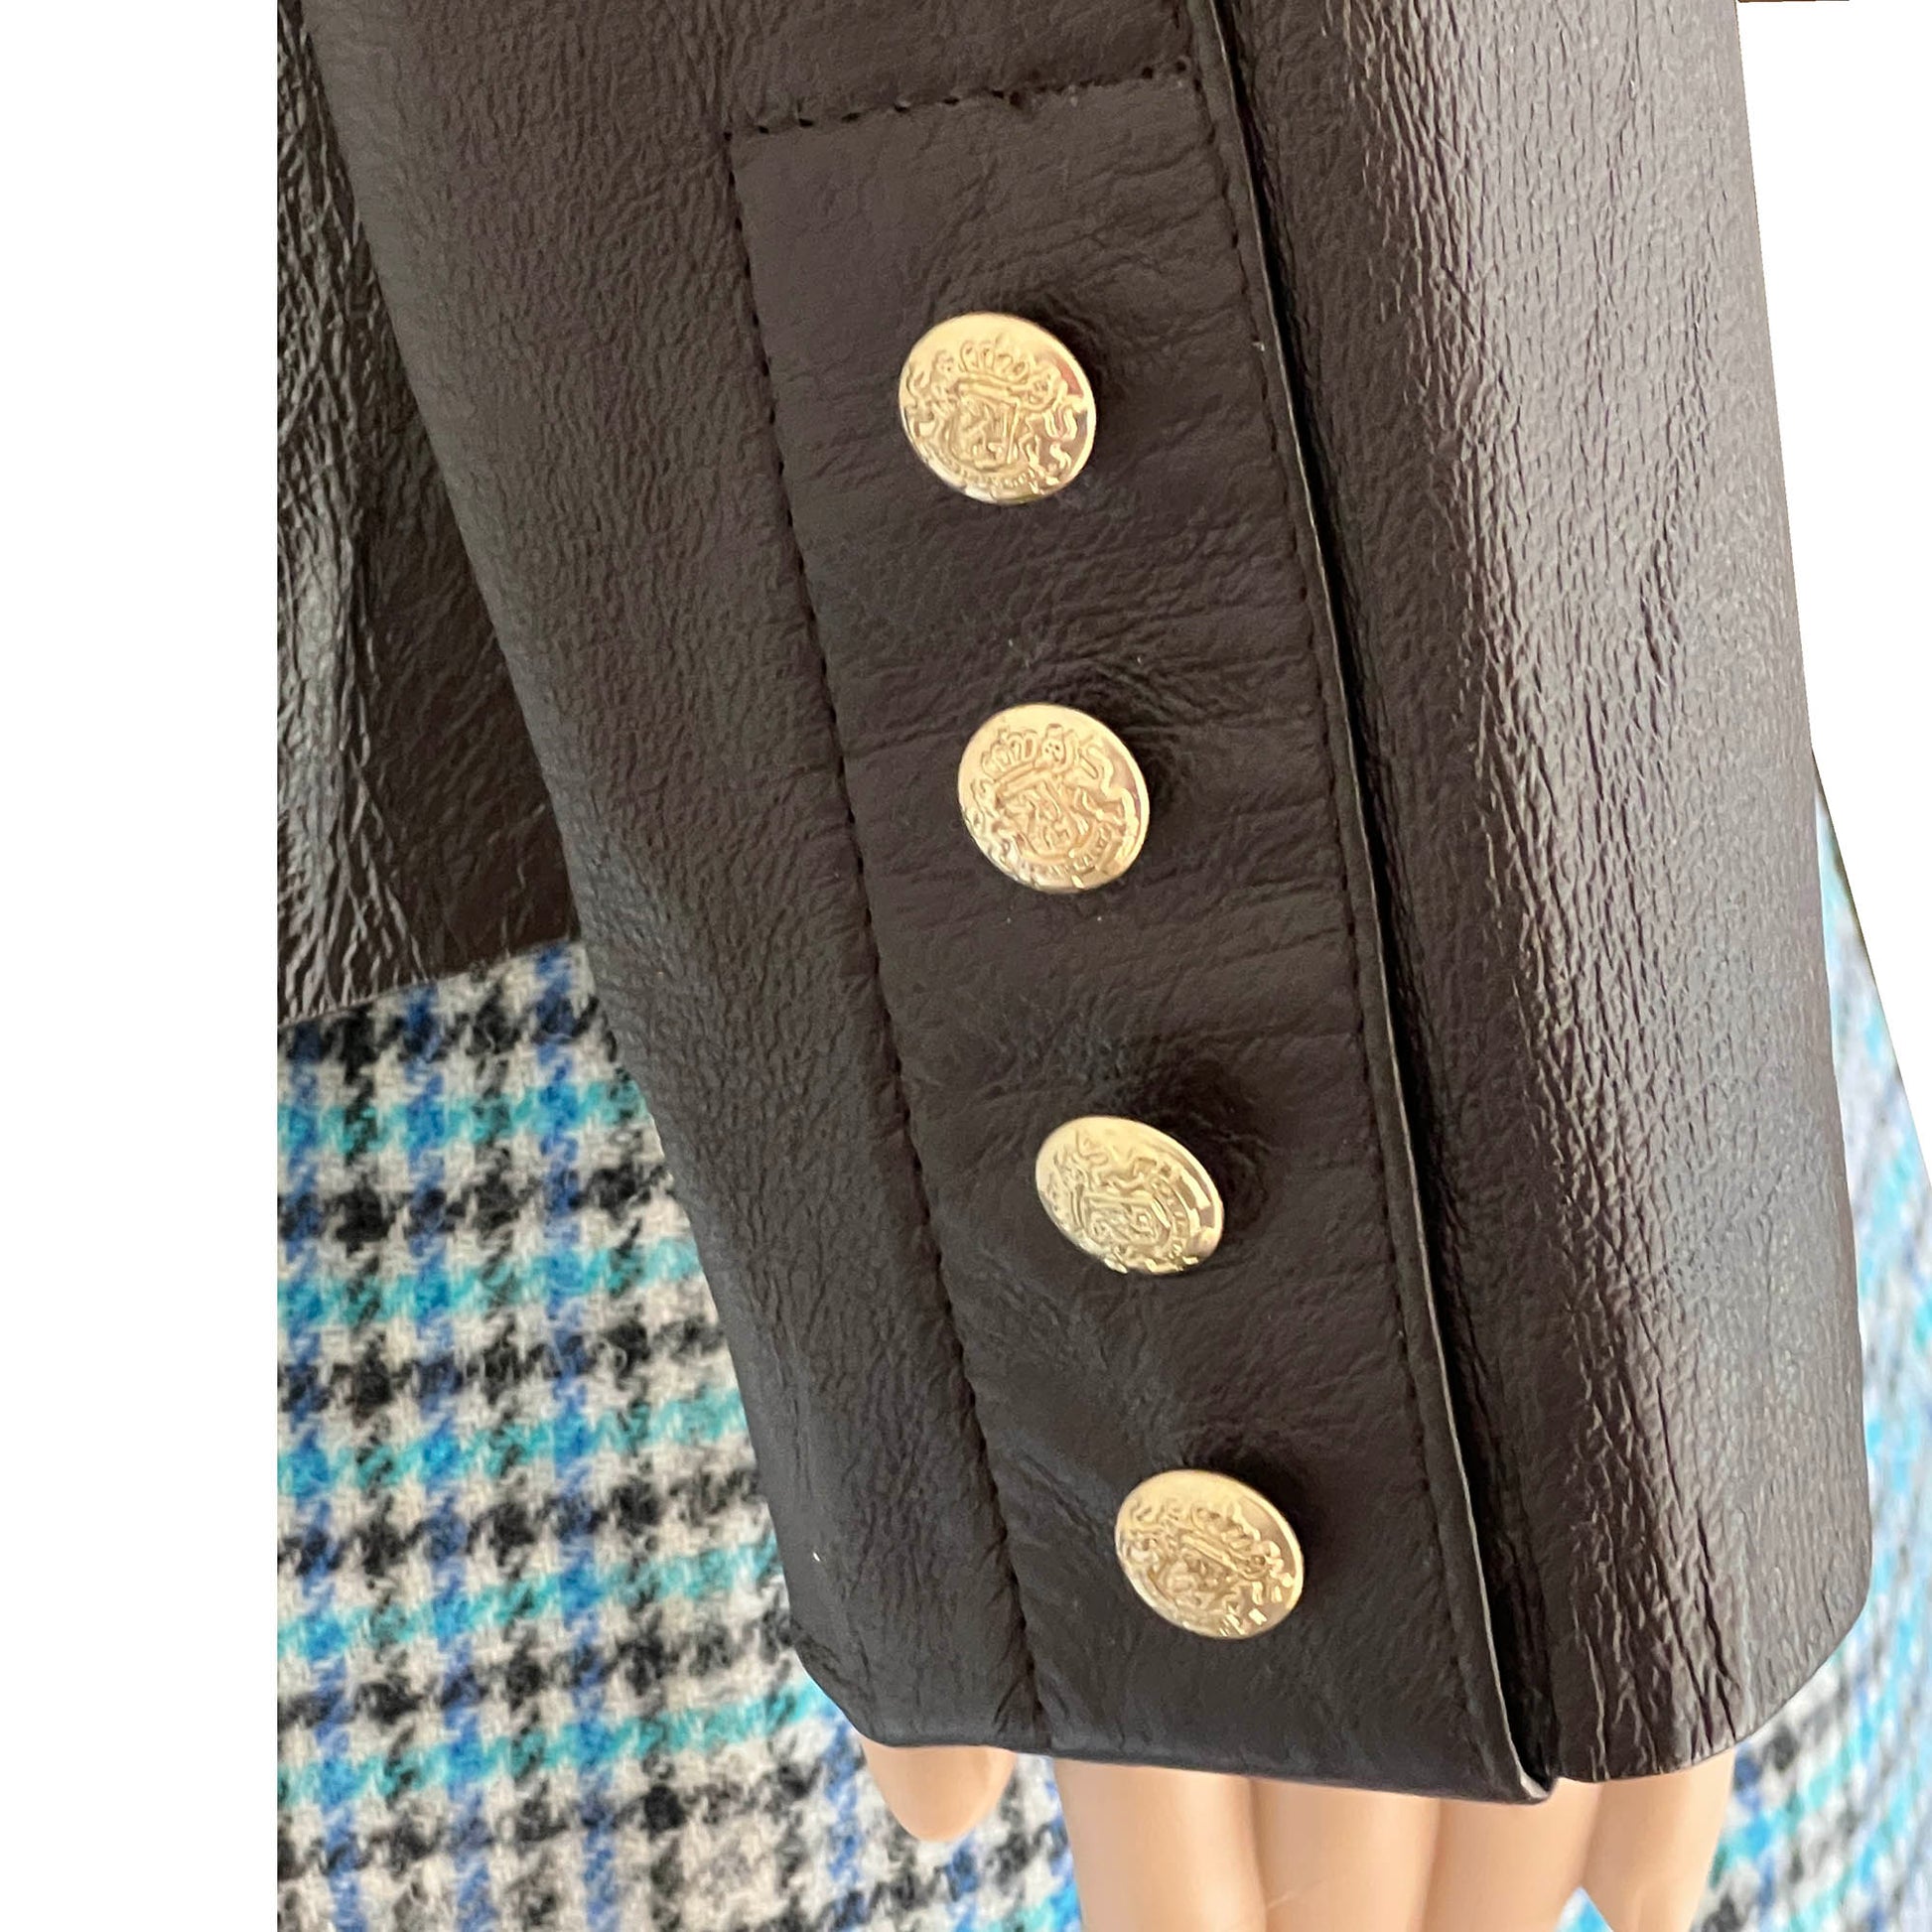 Spiegel-Browl-Leather-Jacket_s-Gold-Buttons